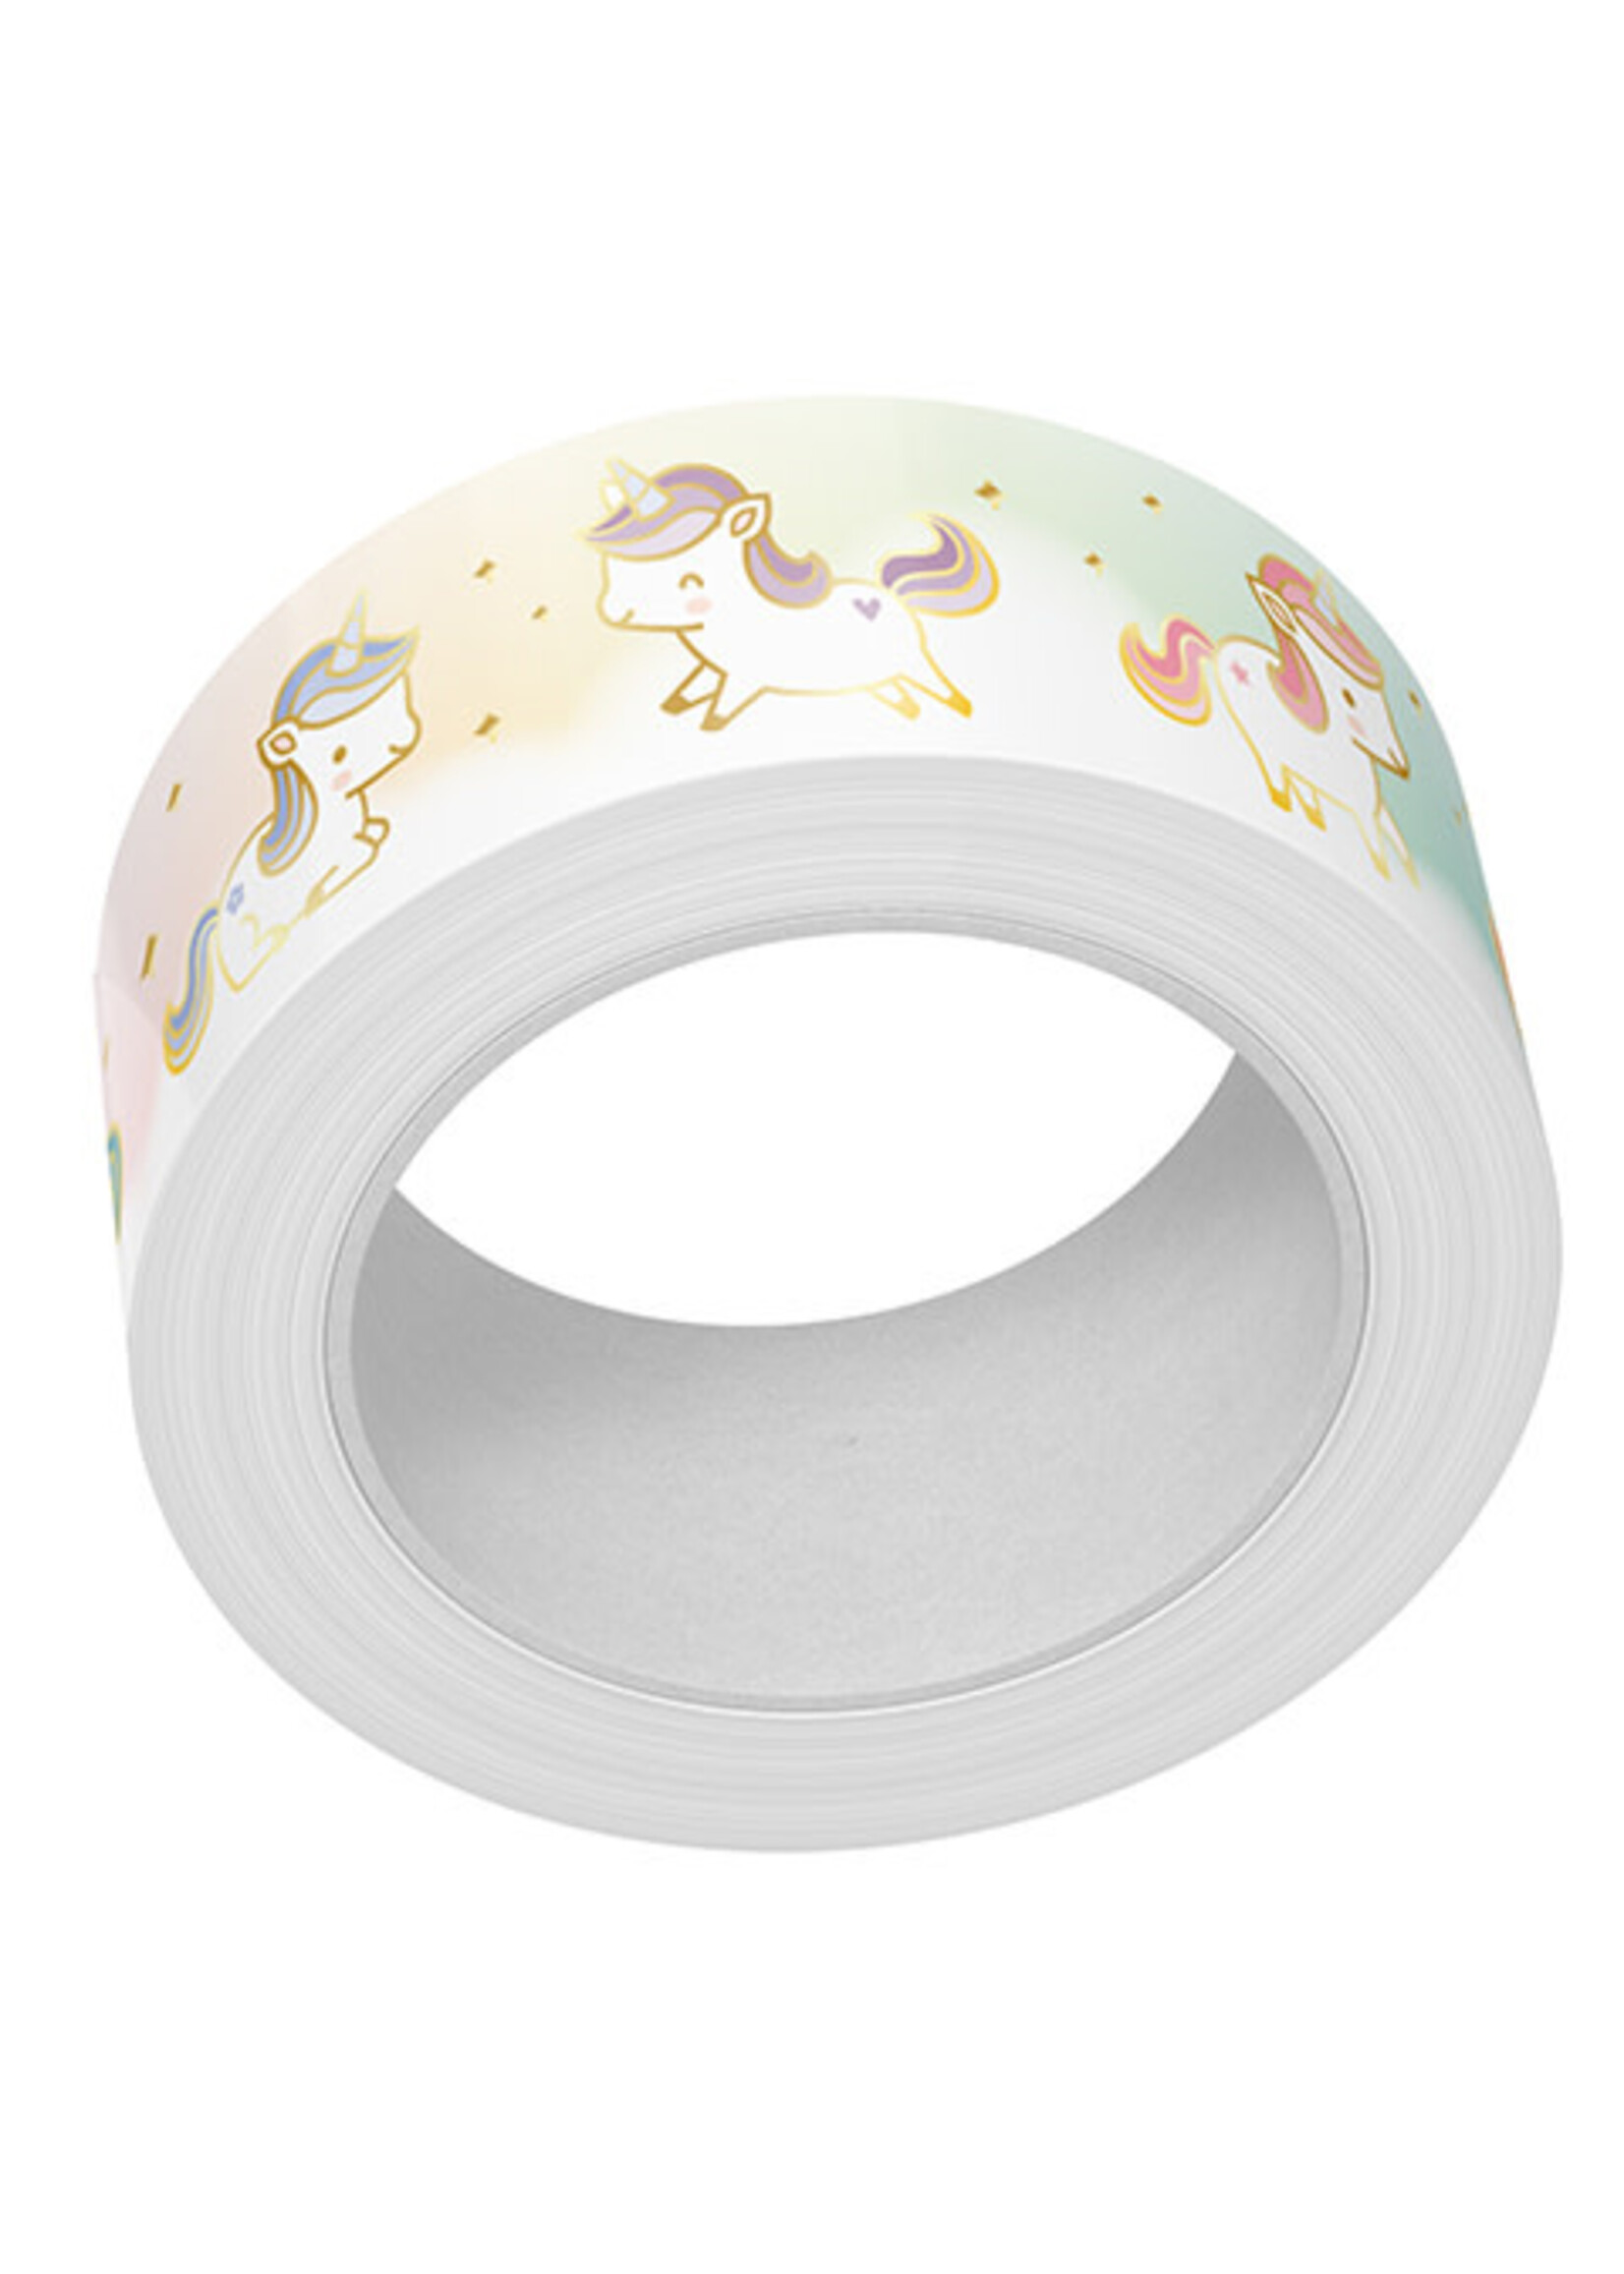 Lawn Fawn unicorn party foiled washi tape